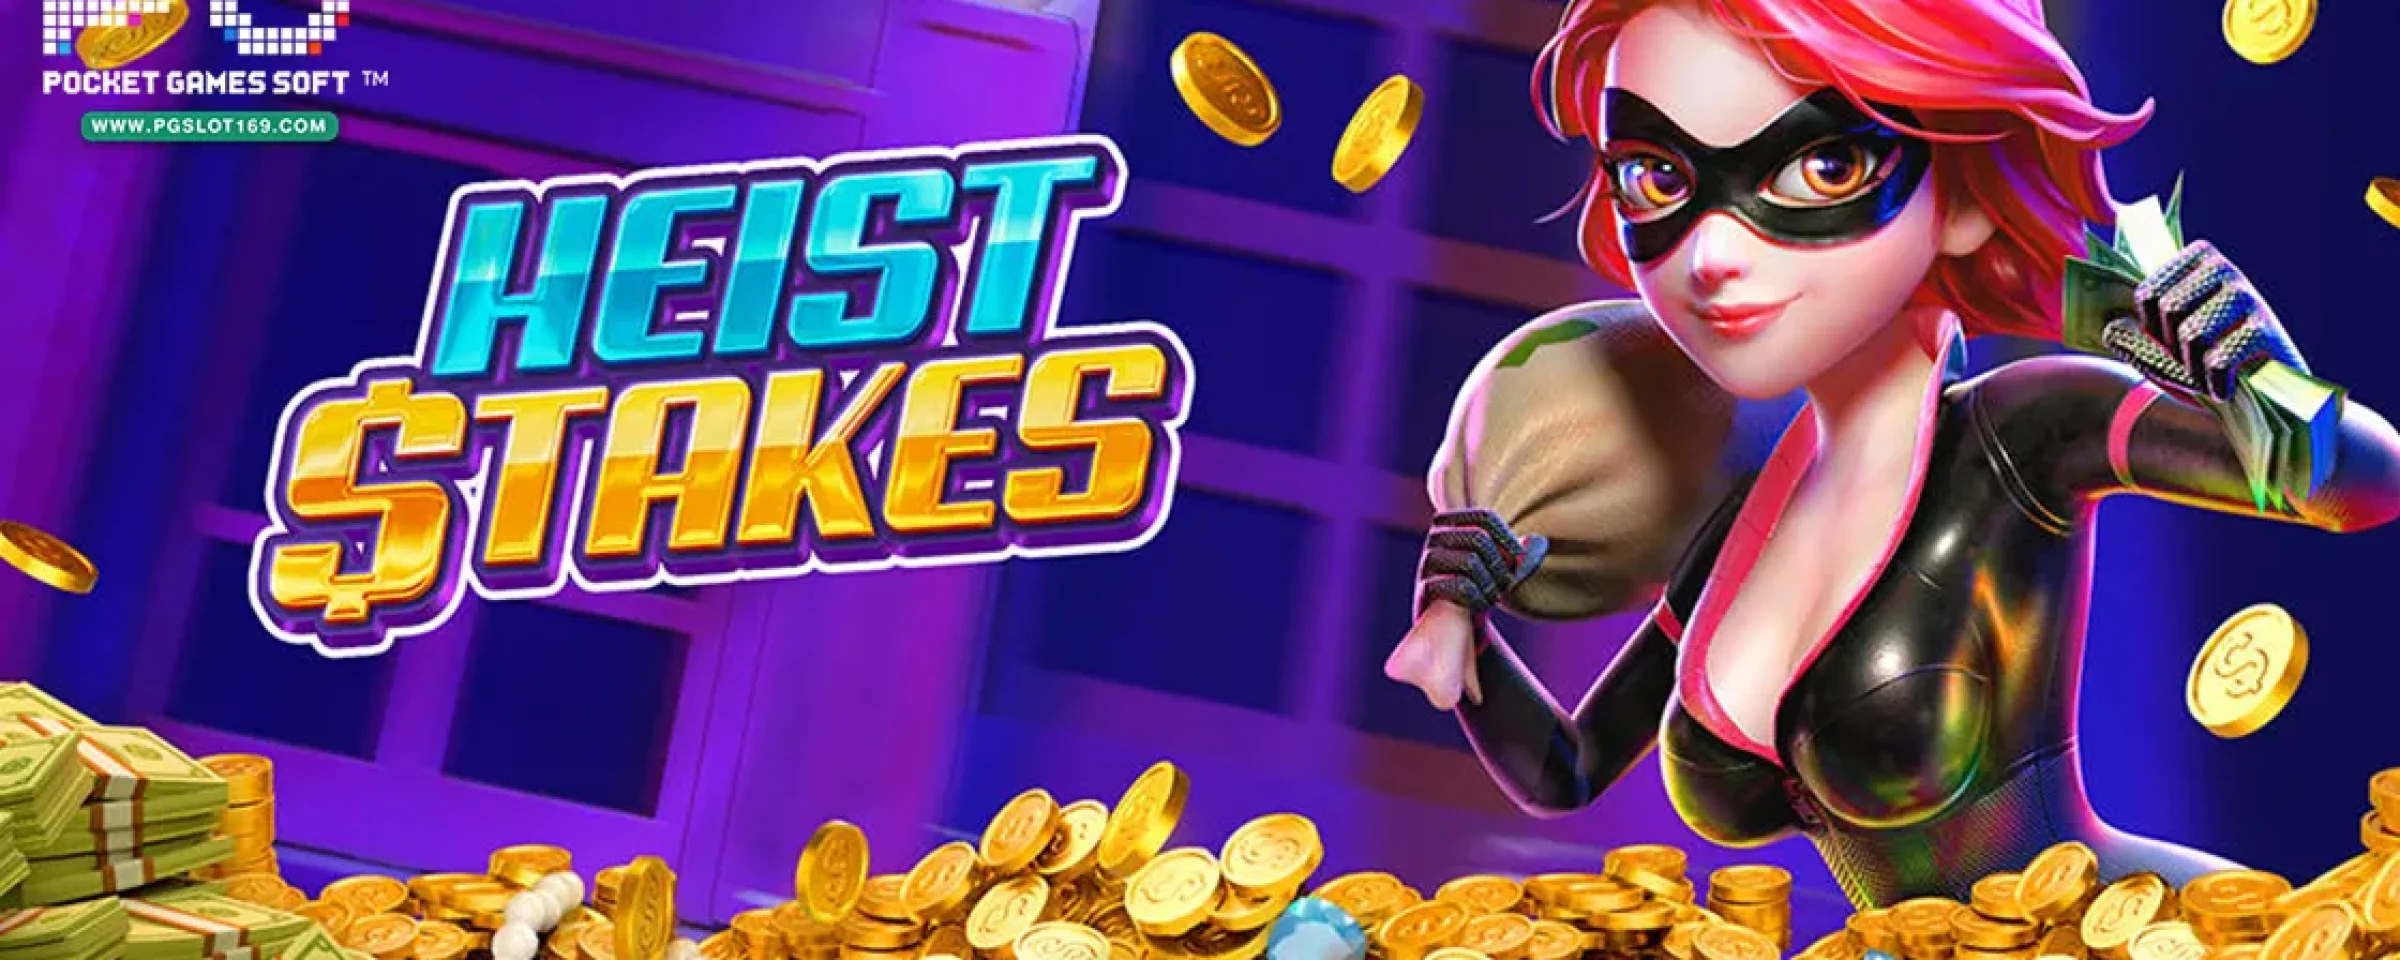 Heist Stakes TITLE